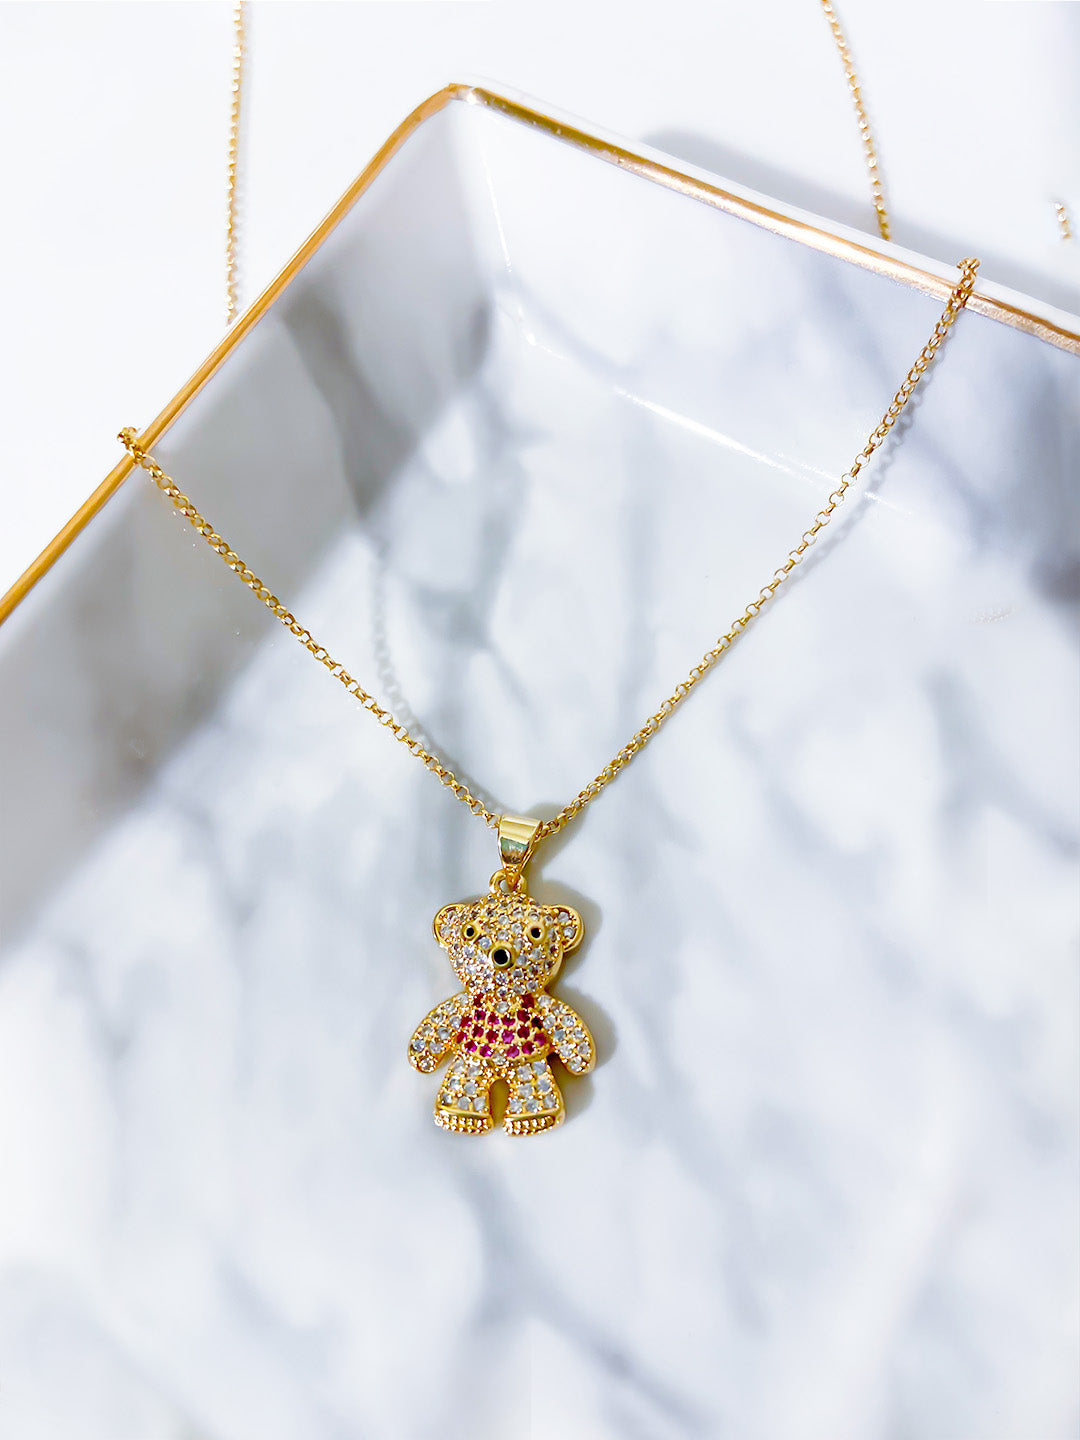 Teddy Bear Necklace - Gold-Filled 